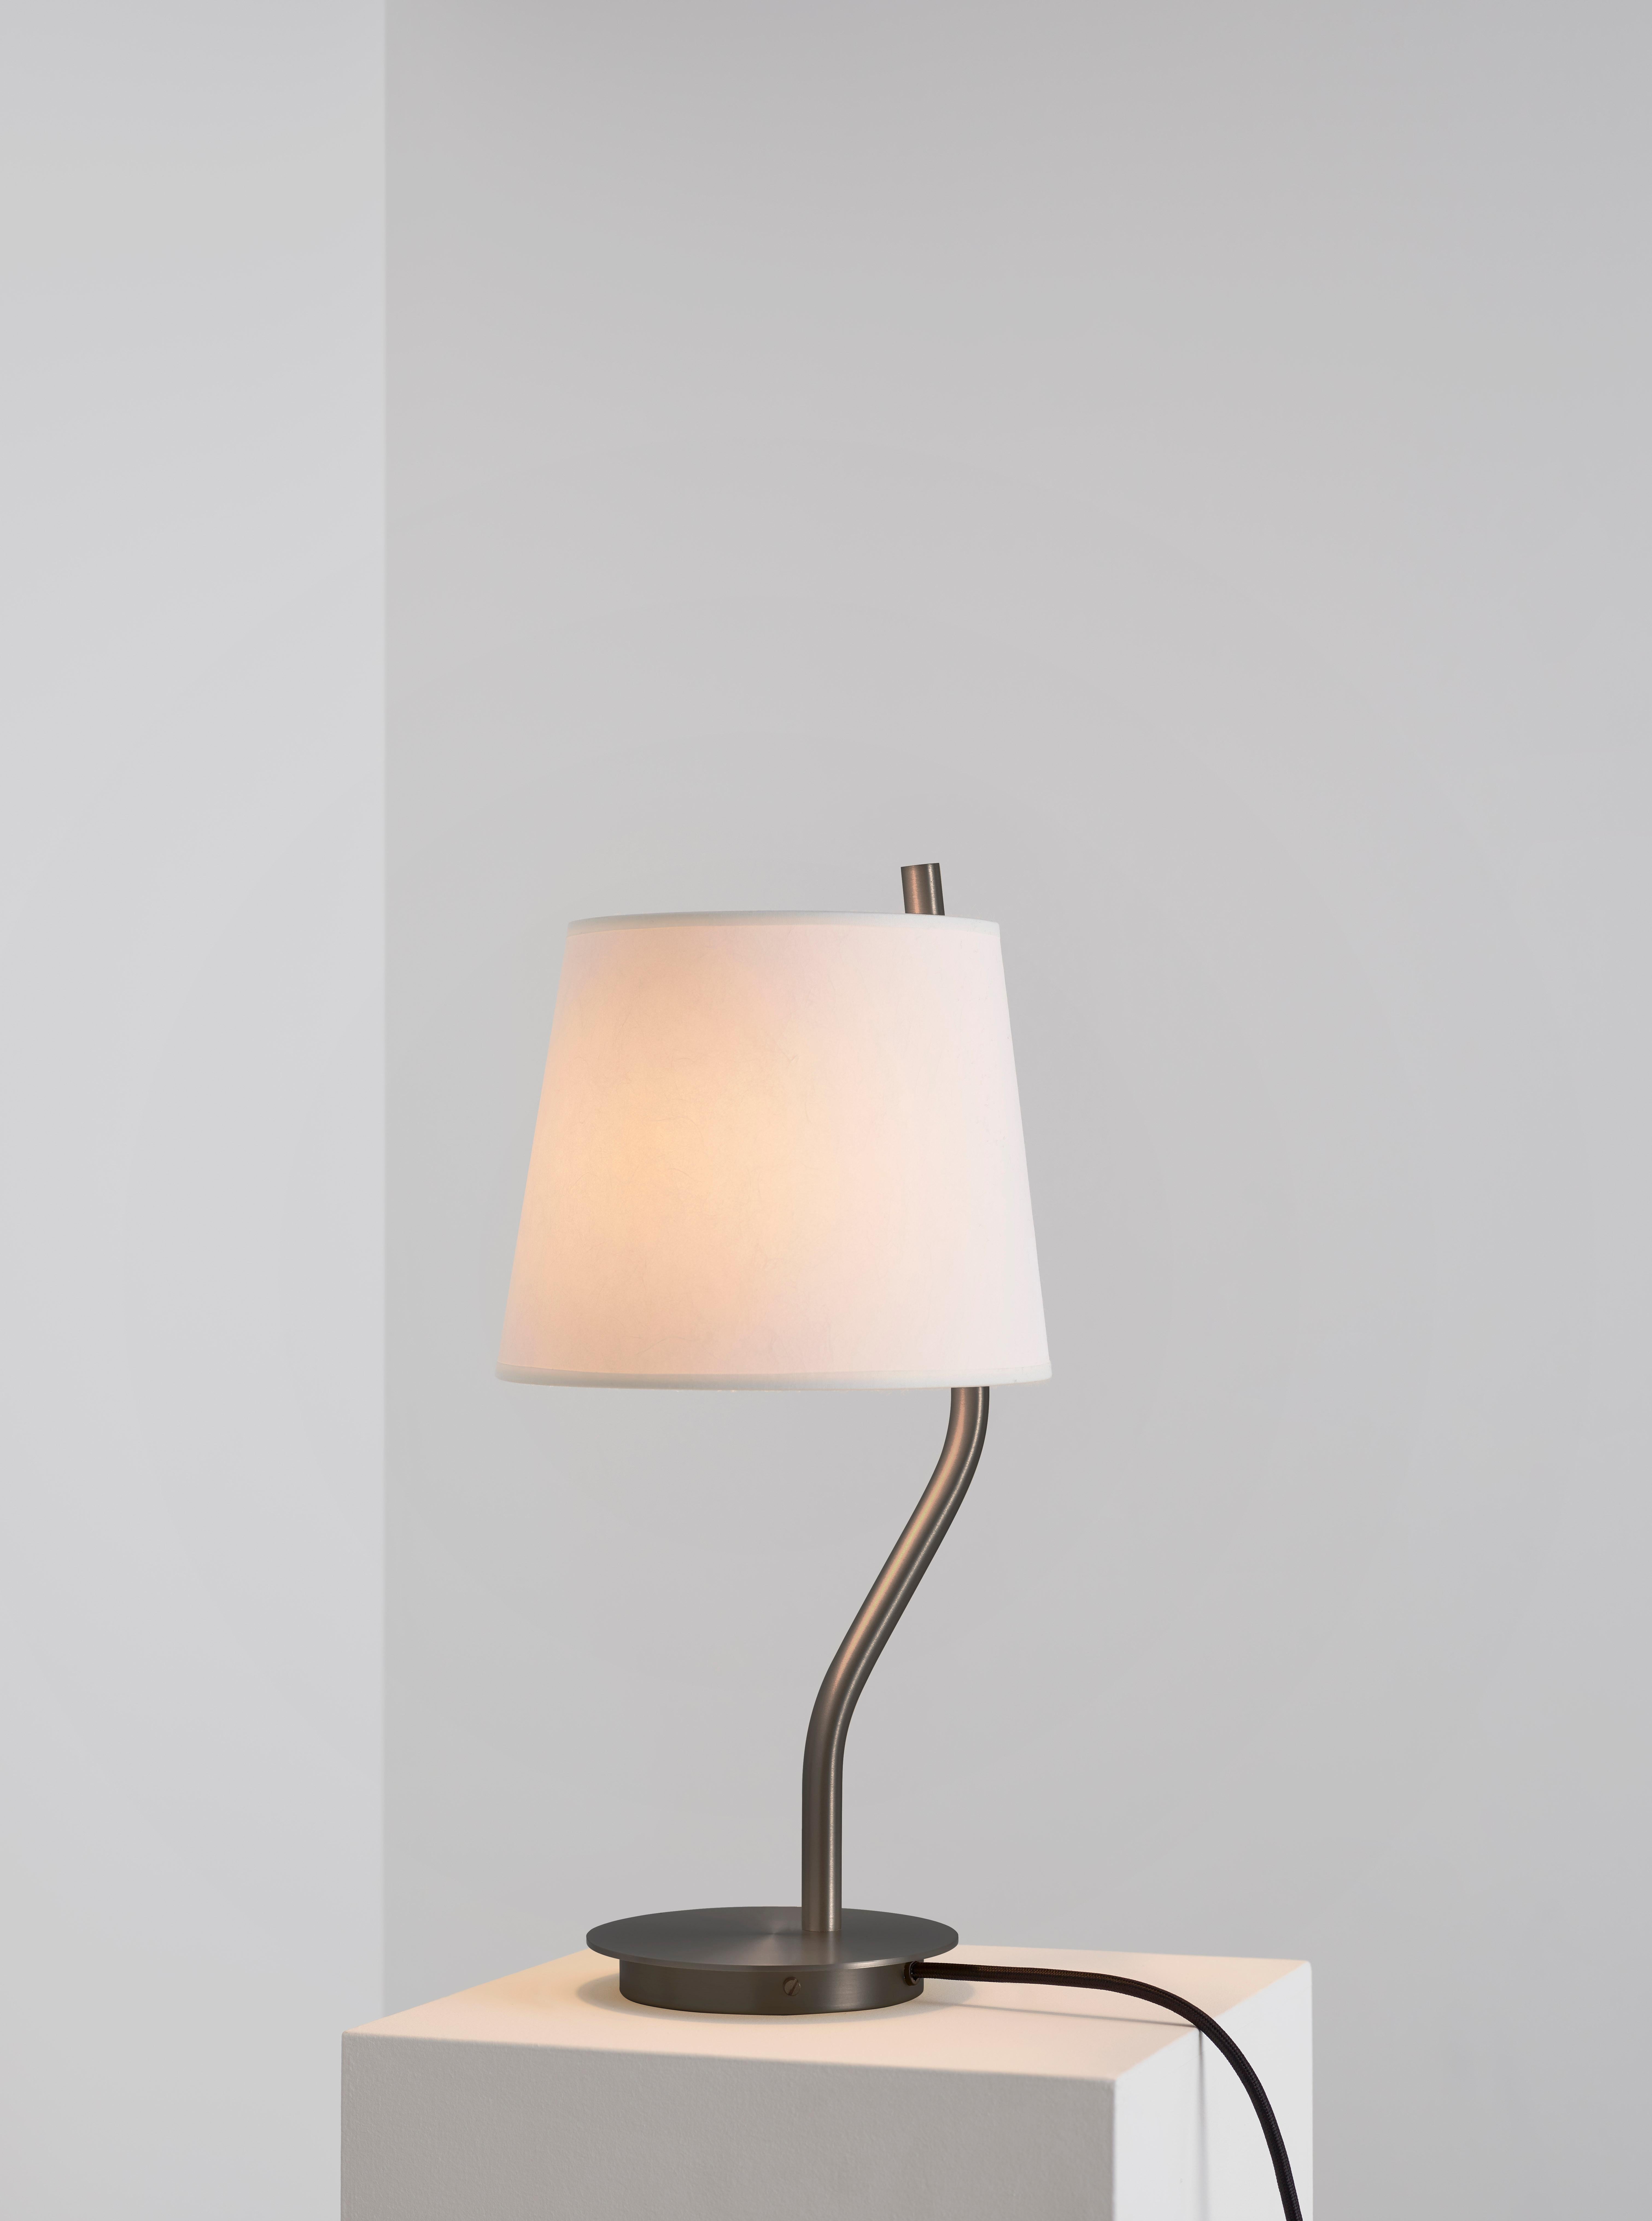 Table lamp couture by Hervé Langlais
Dimensions: 45 H cm.
Materials: Satin brass, drop paper.
Customizable materials.

Arborescence is a complete range in a variety of sizes and finishes. As a flexible concept, you can customize the light into